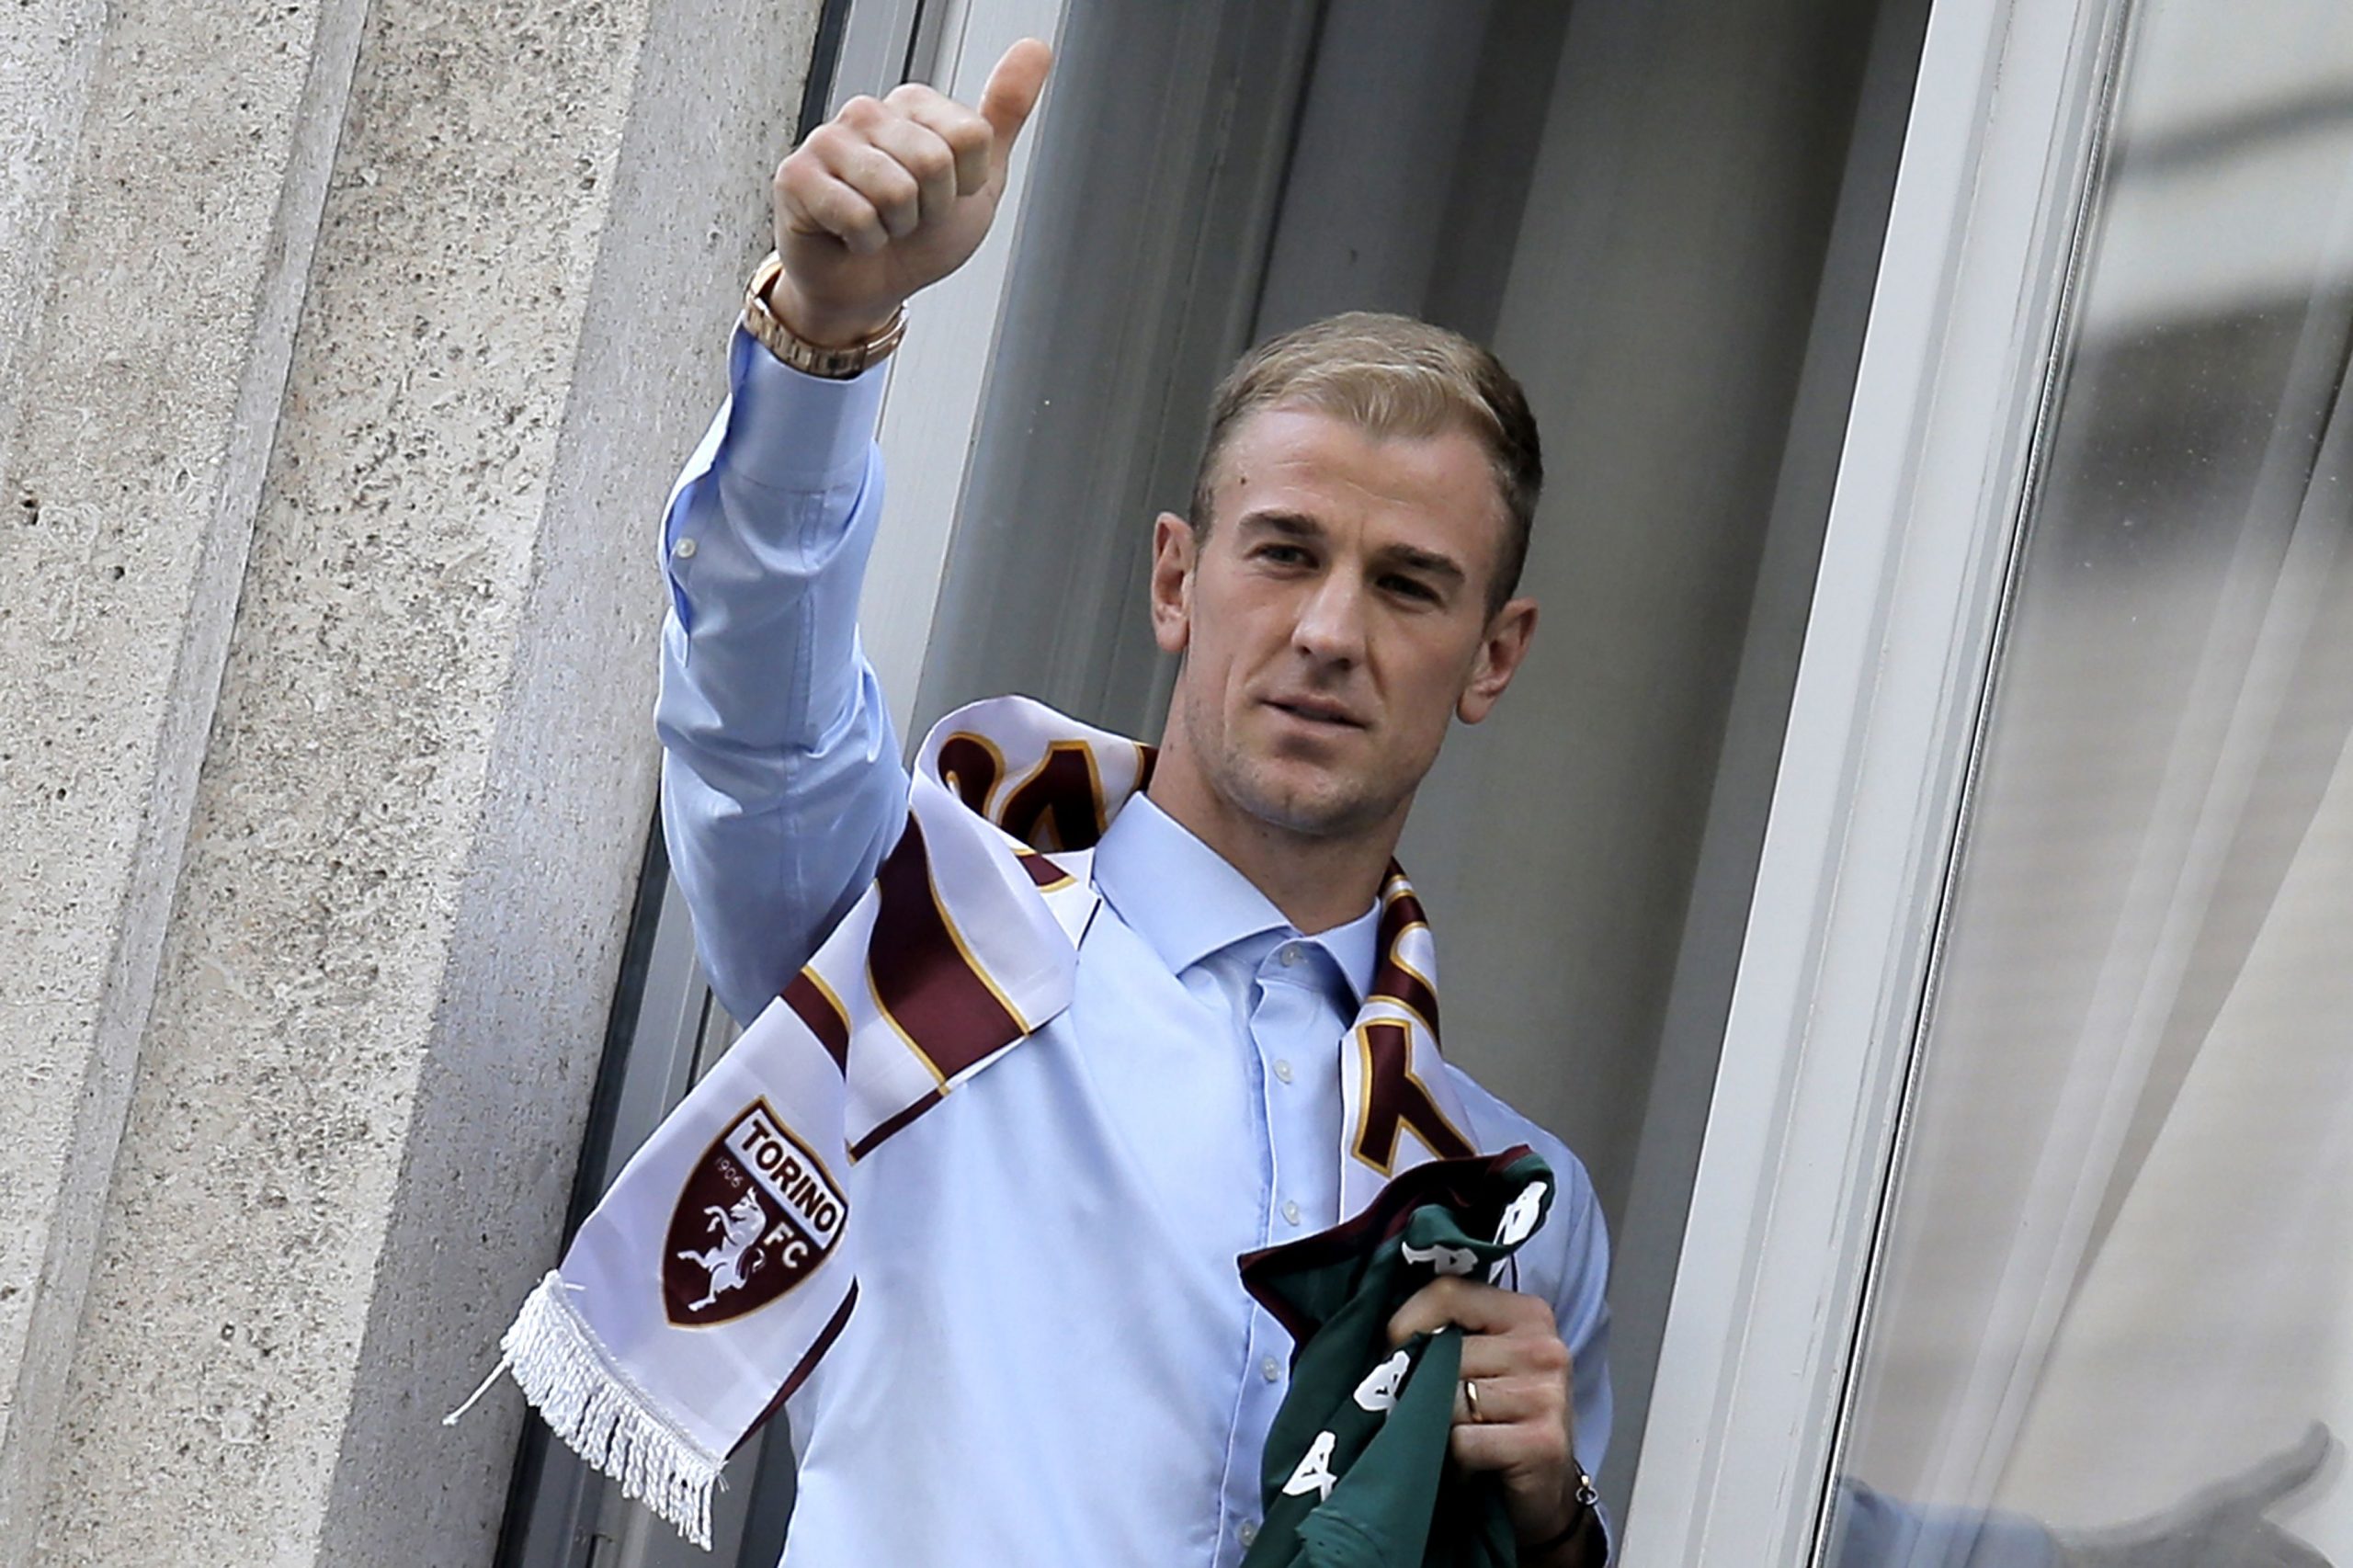 British goalkeeper Joe Hart gives a thumbs up upon his arrival for a medical check before joining the Torino football club from former club Manchester City on August 30, 2016 in Turin.
England goalkeeper Joe Hart arrived in Turin on August 30 ahead of undergoing a medical that should see him sign a season-long loan deal with the unfashionable Serie A club. Hart, 29, has fallen out of favour with Pep Guardiola at Manchester City following the signing of Claudio Bravo from Barcelona and is set to join Torino in a bid to preserve his club future and international career following England's spectacular Euro 2016 exit.
 / AFP / Marco BERTORELLO        (Photo credit should read MARCO BERTORELLO/AFP/Getty Images)